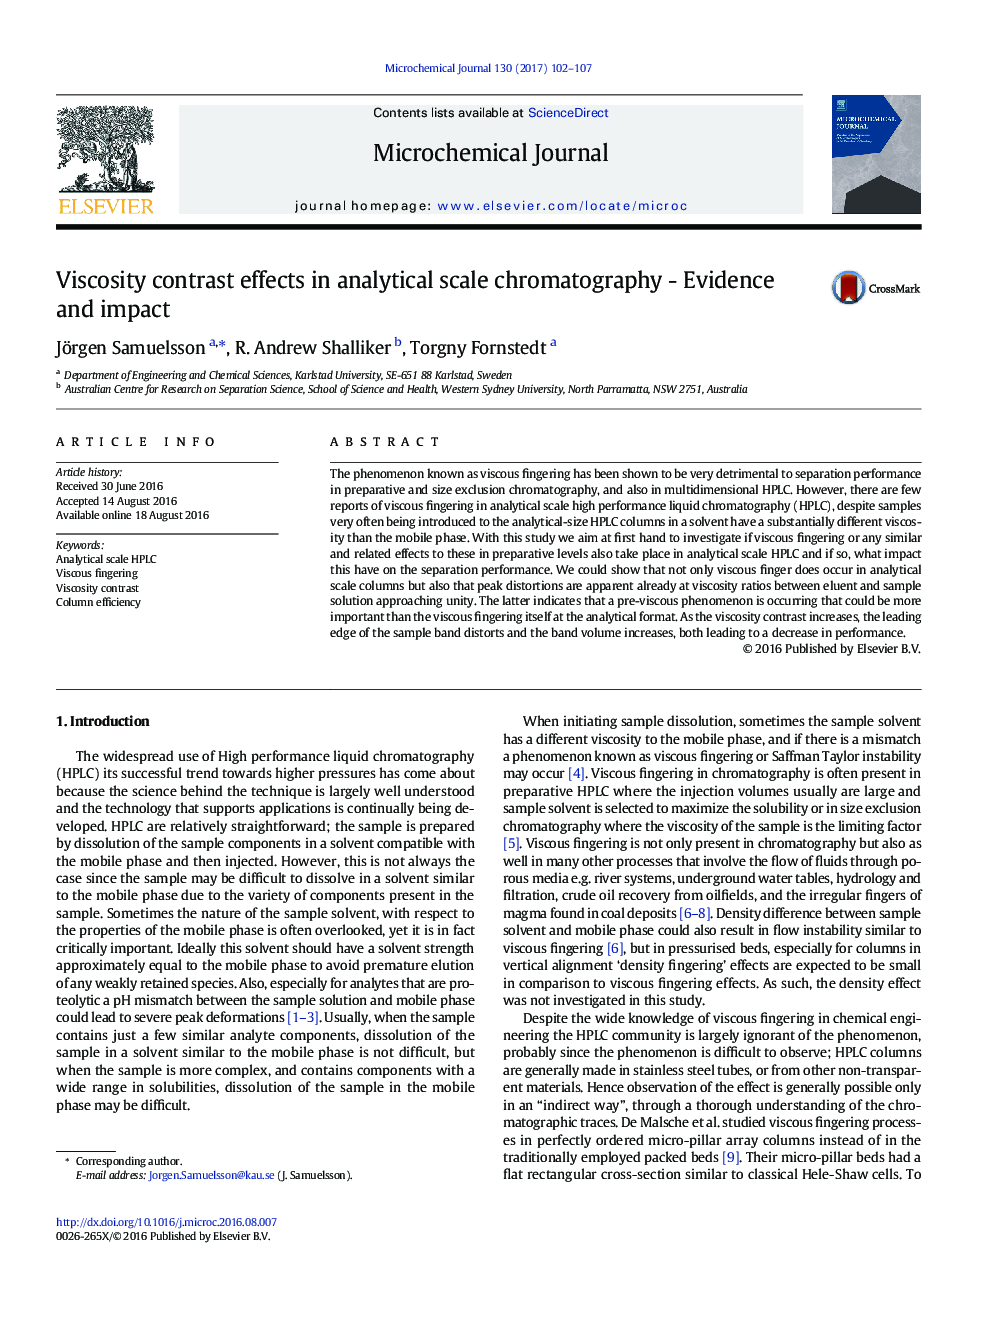 Viscosity contrast effects in analytical scale chromatography - Evidence and impact